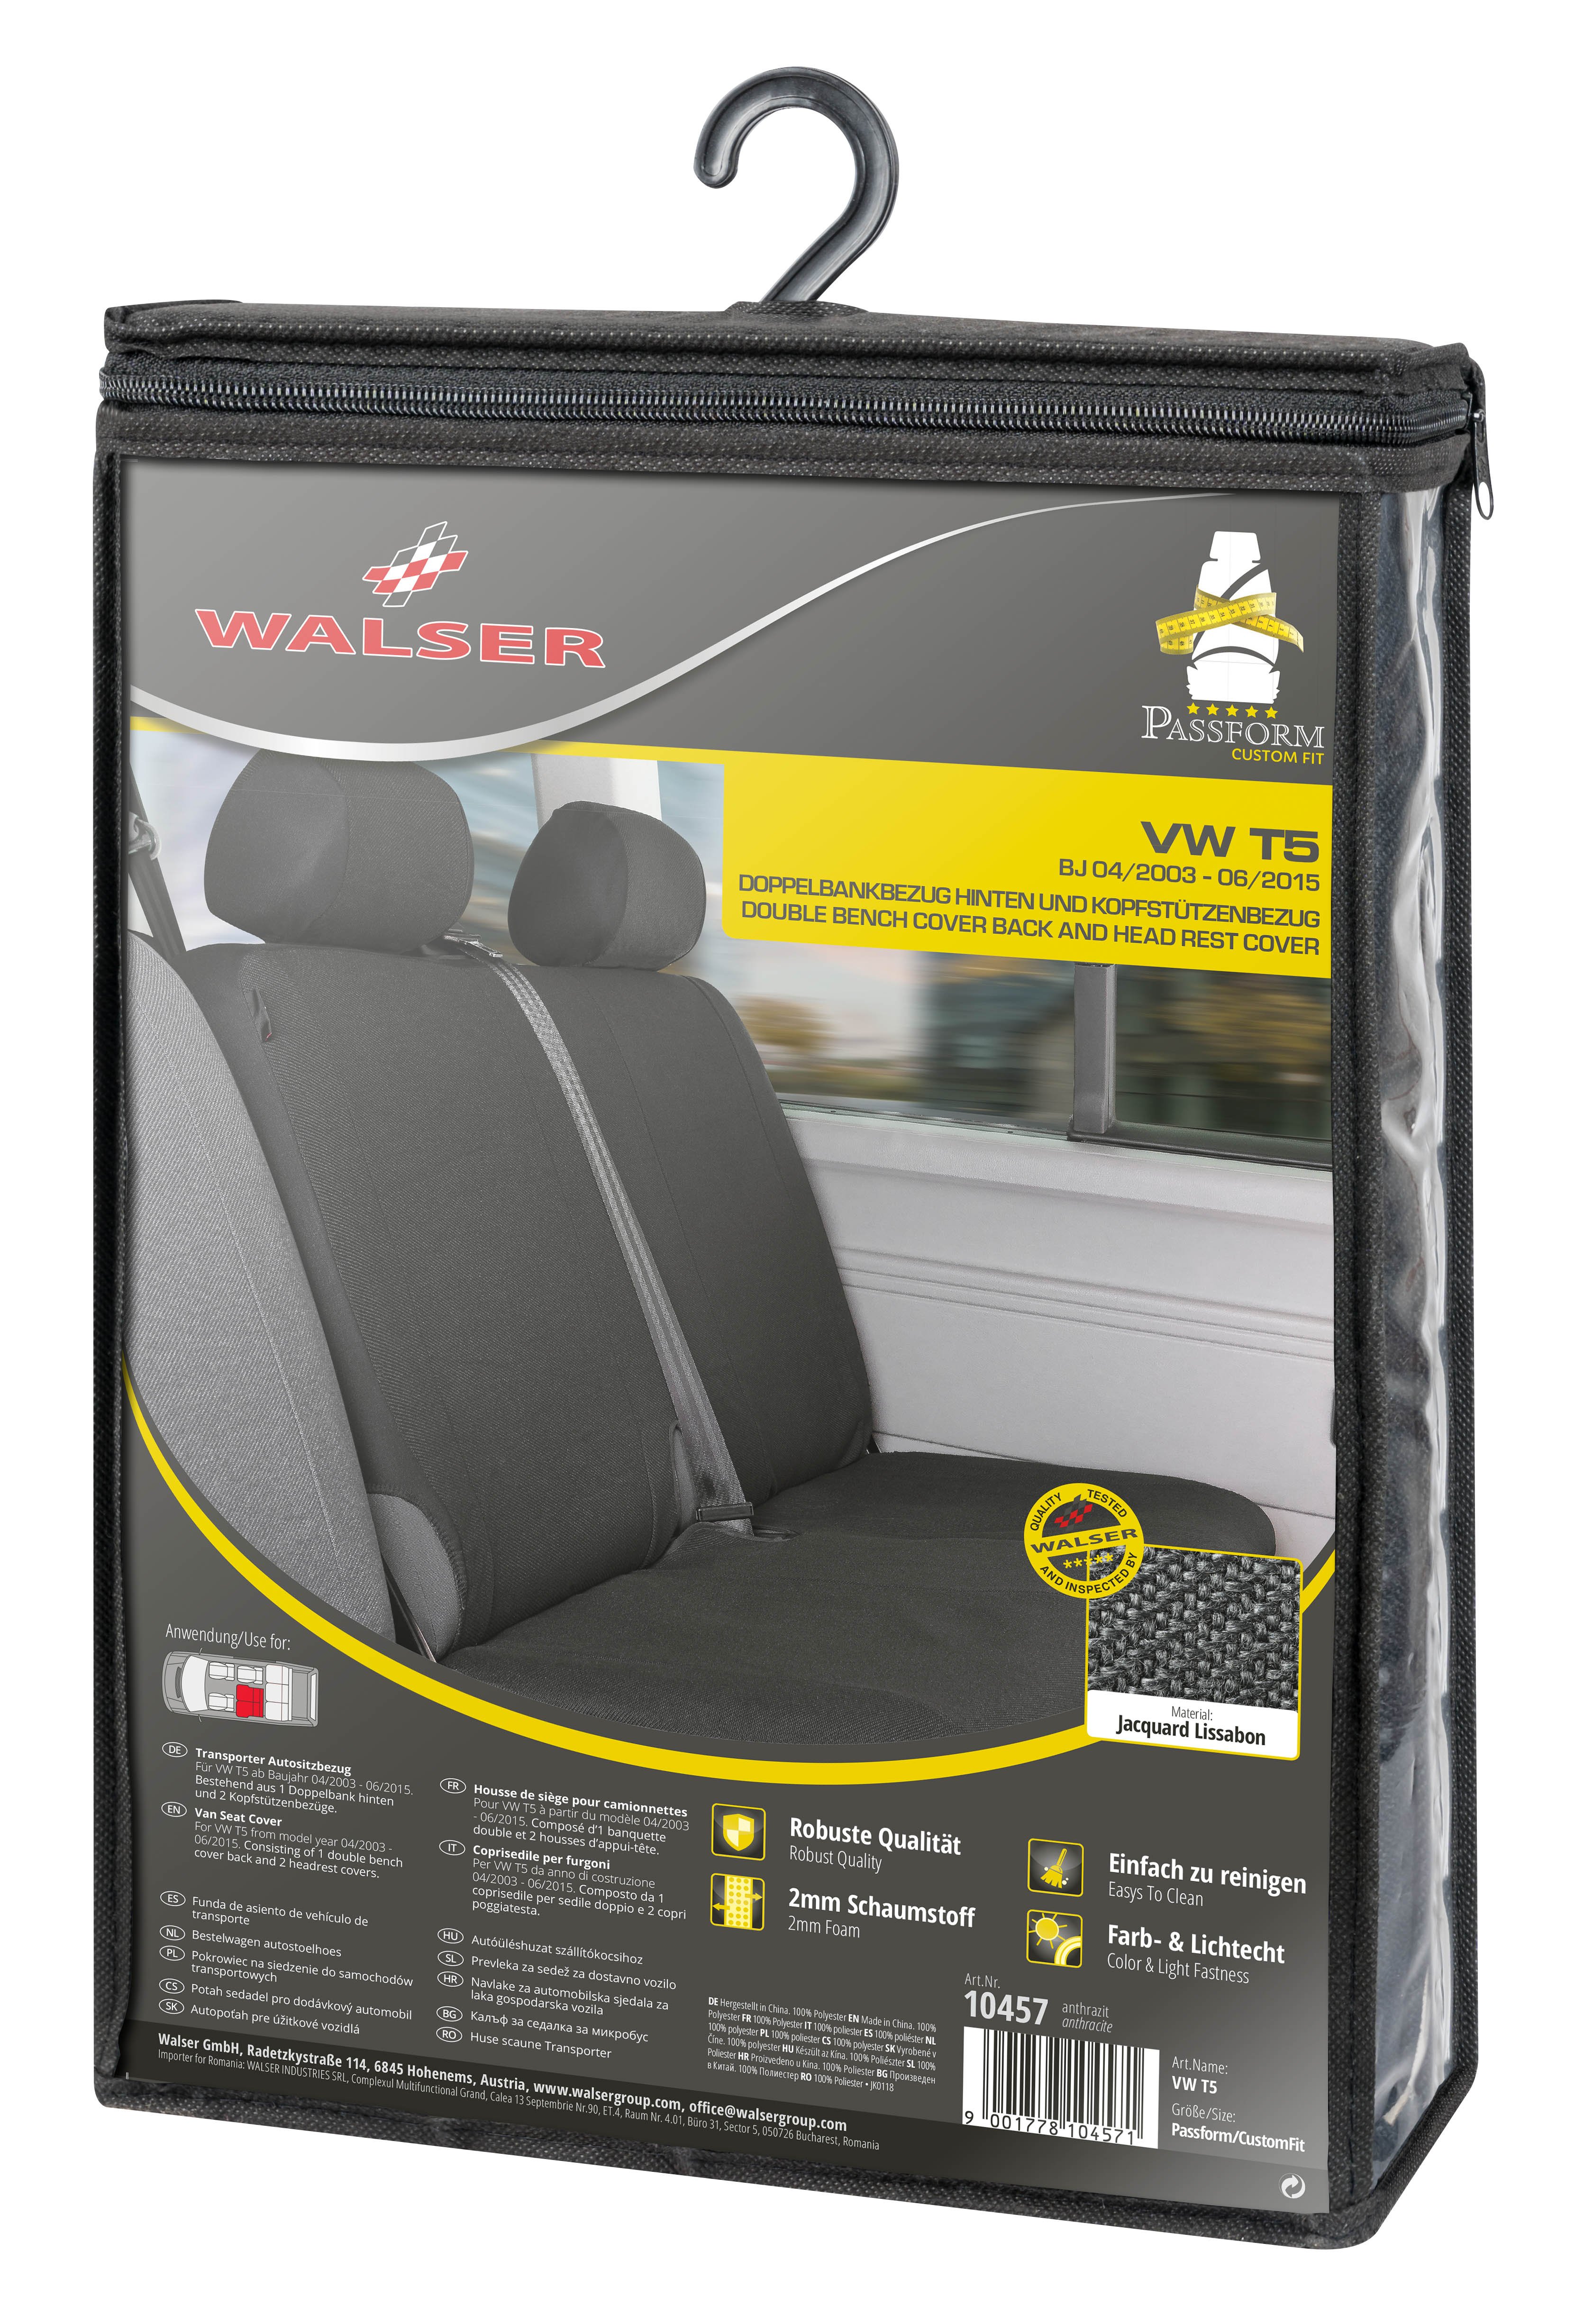 Car Seat cover Transporter made of fabric for VW T5, double bench rear